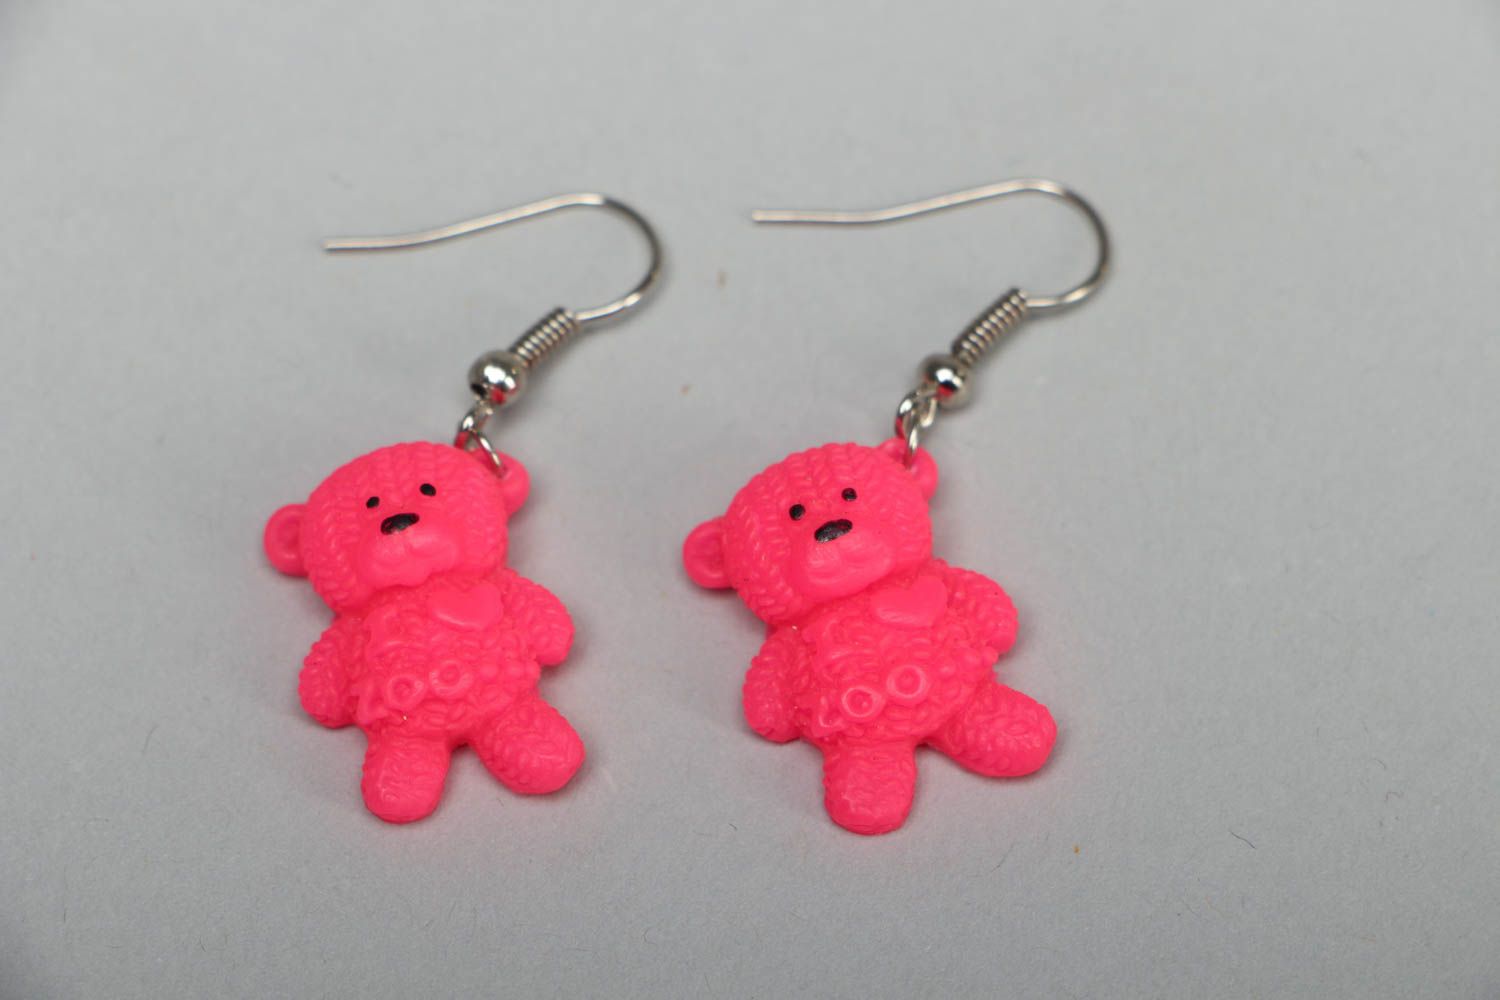 Polymer clay earrings in the shape of pink bears photo 1